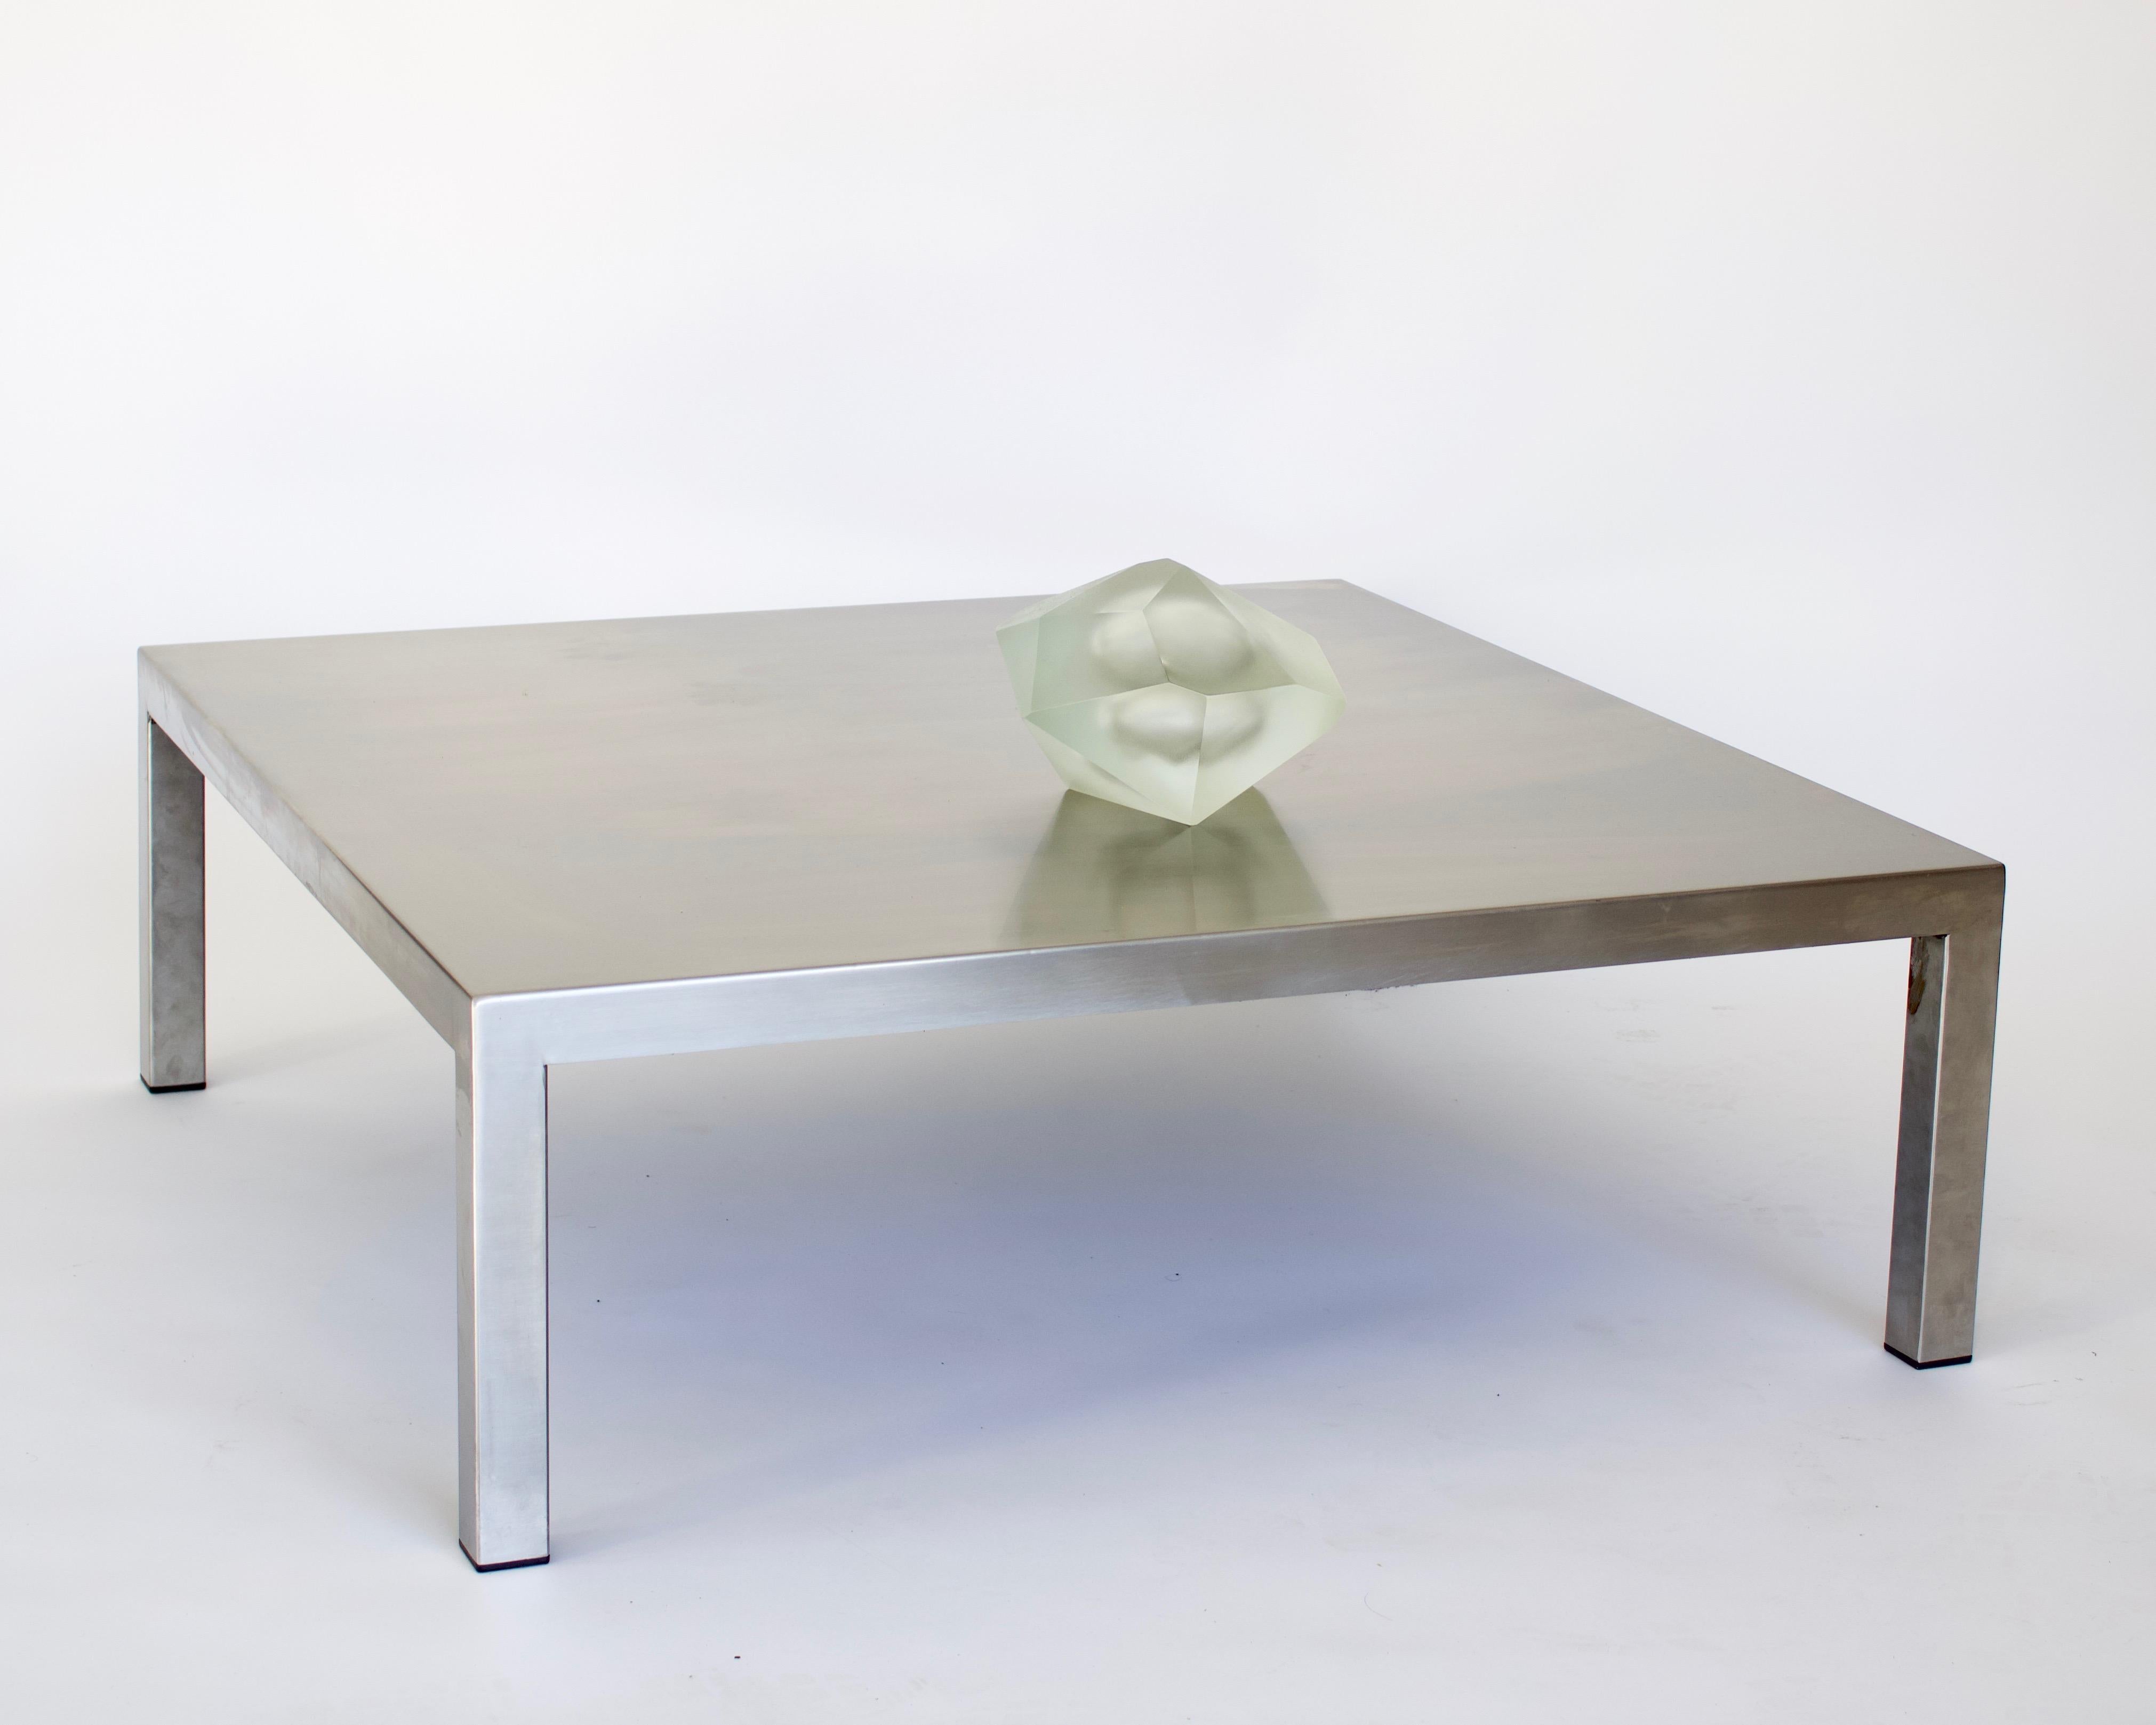 Maria Pergay Square French Stainless Steel Coffee Table, circa 1970 For Sale 7